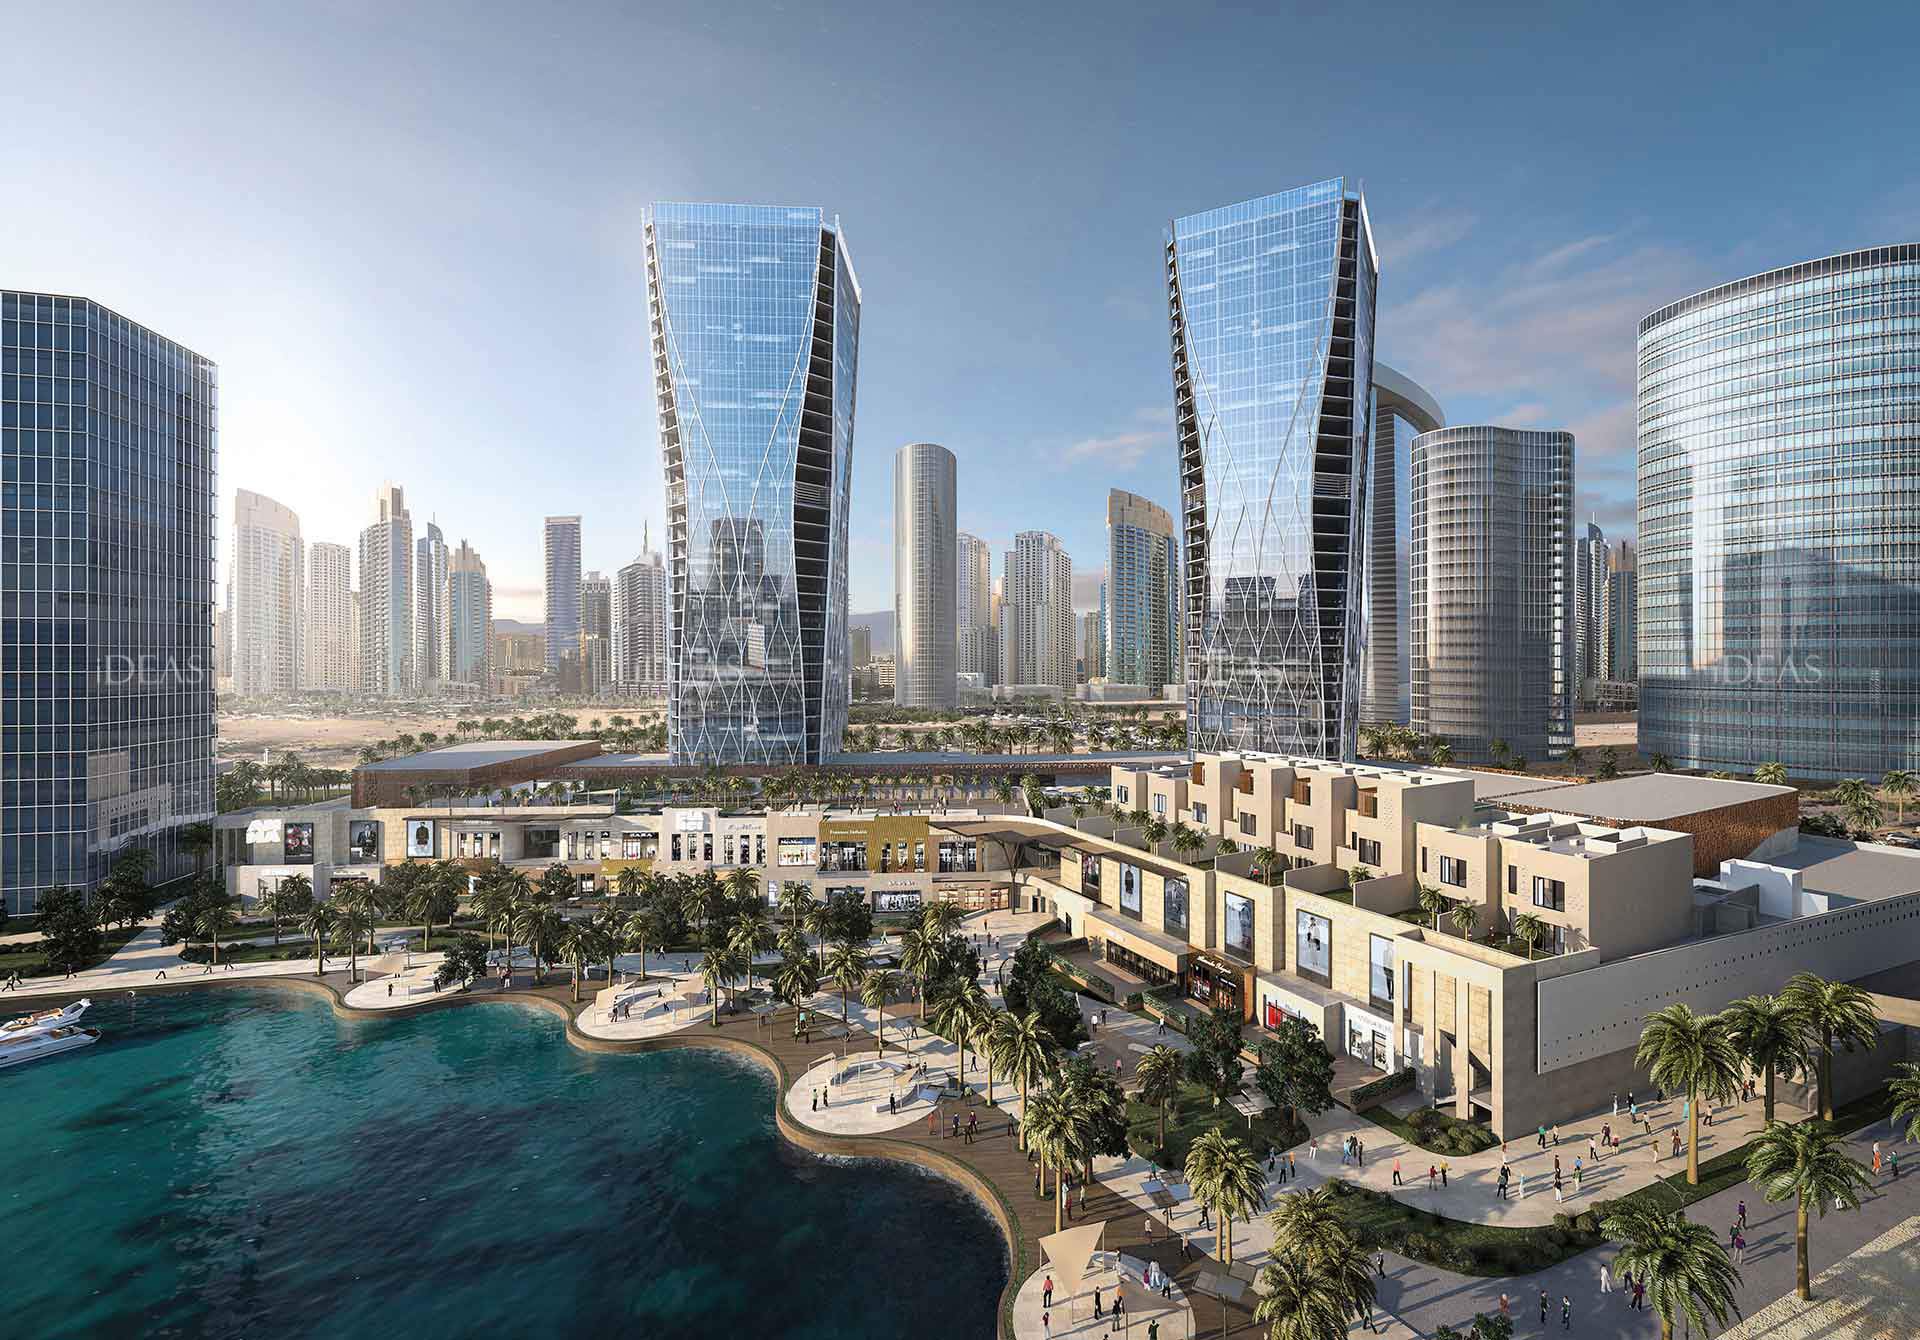 reem towers harbour structural engineering